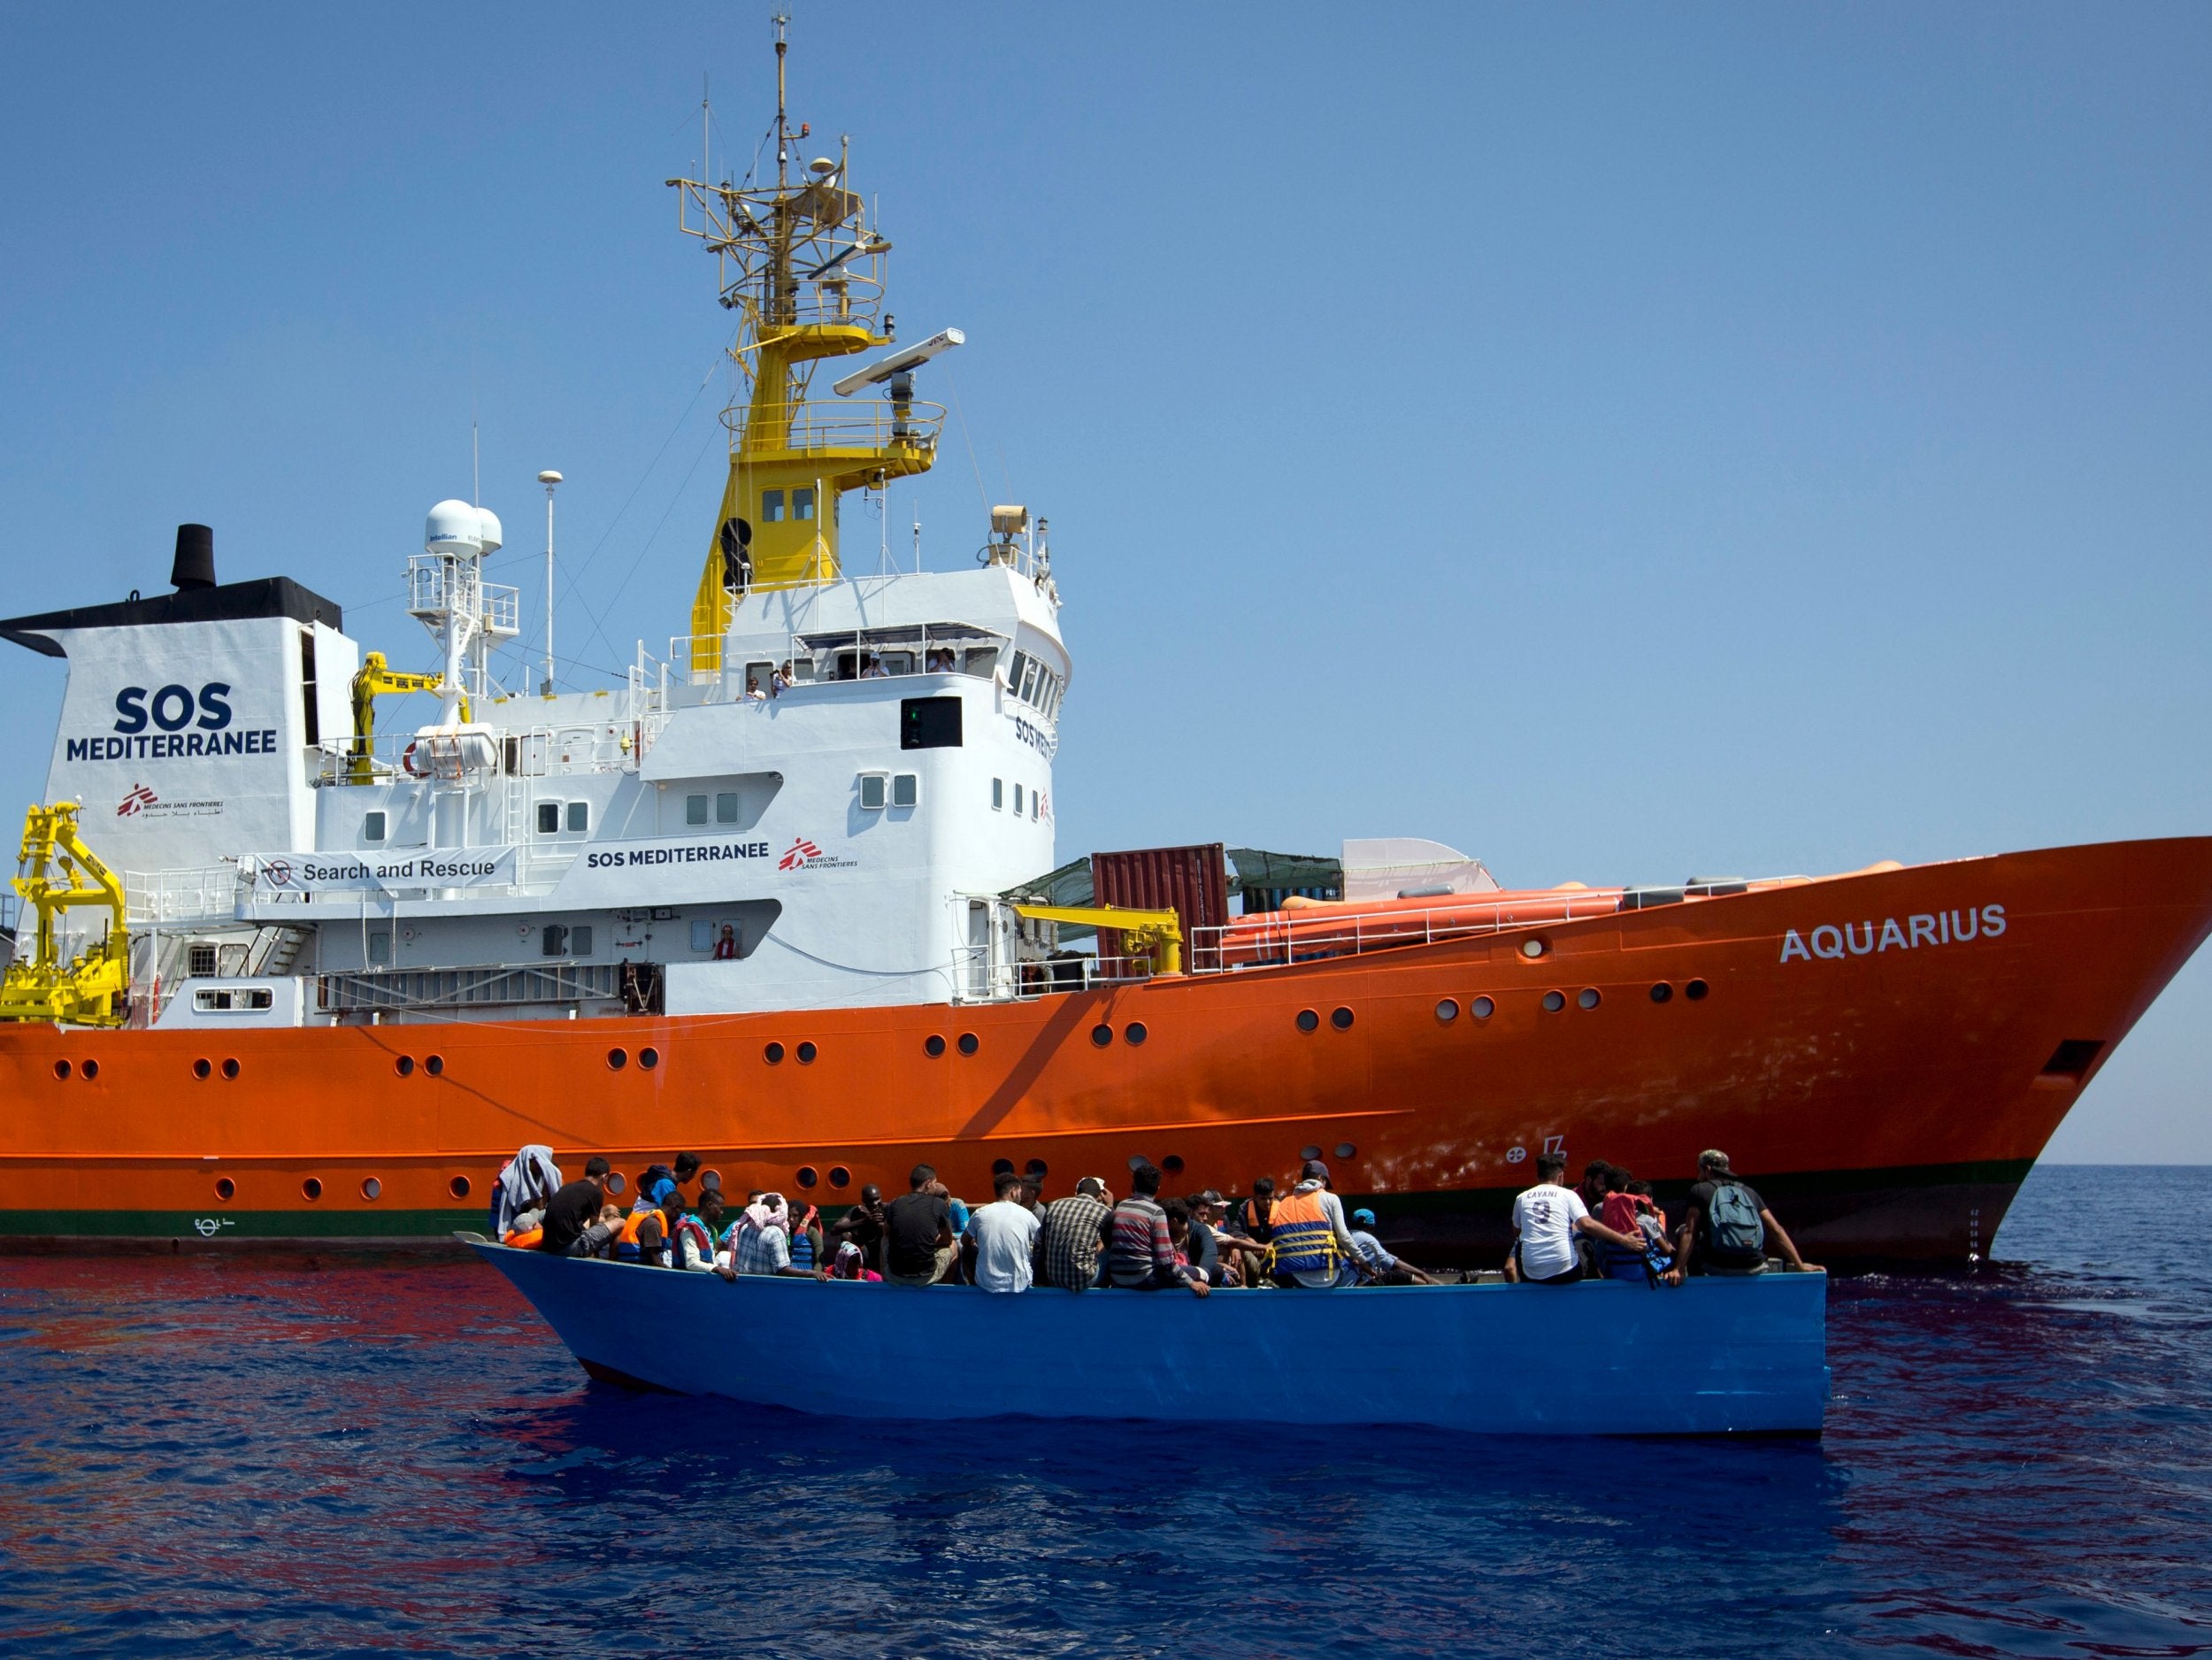 Aquarius has been stuck in a Marseille port for past two months